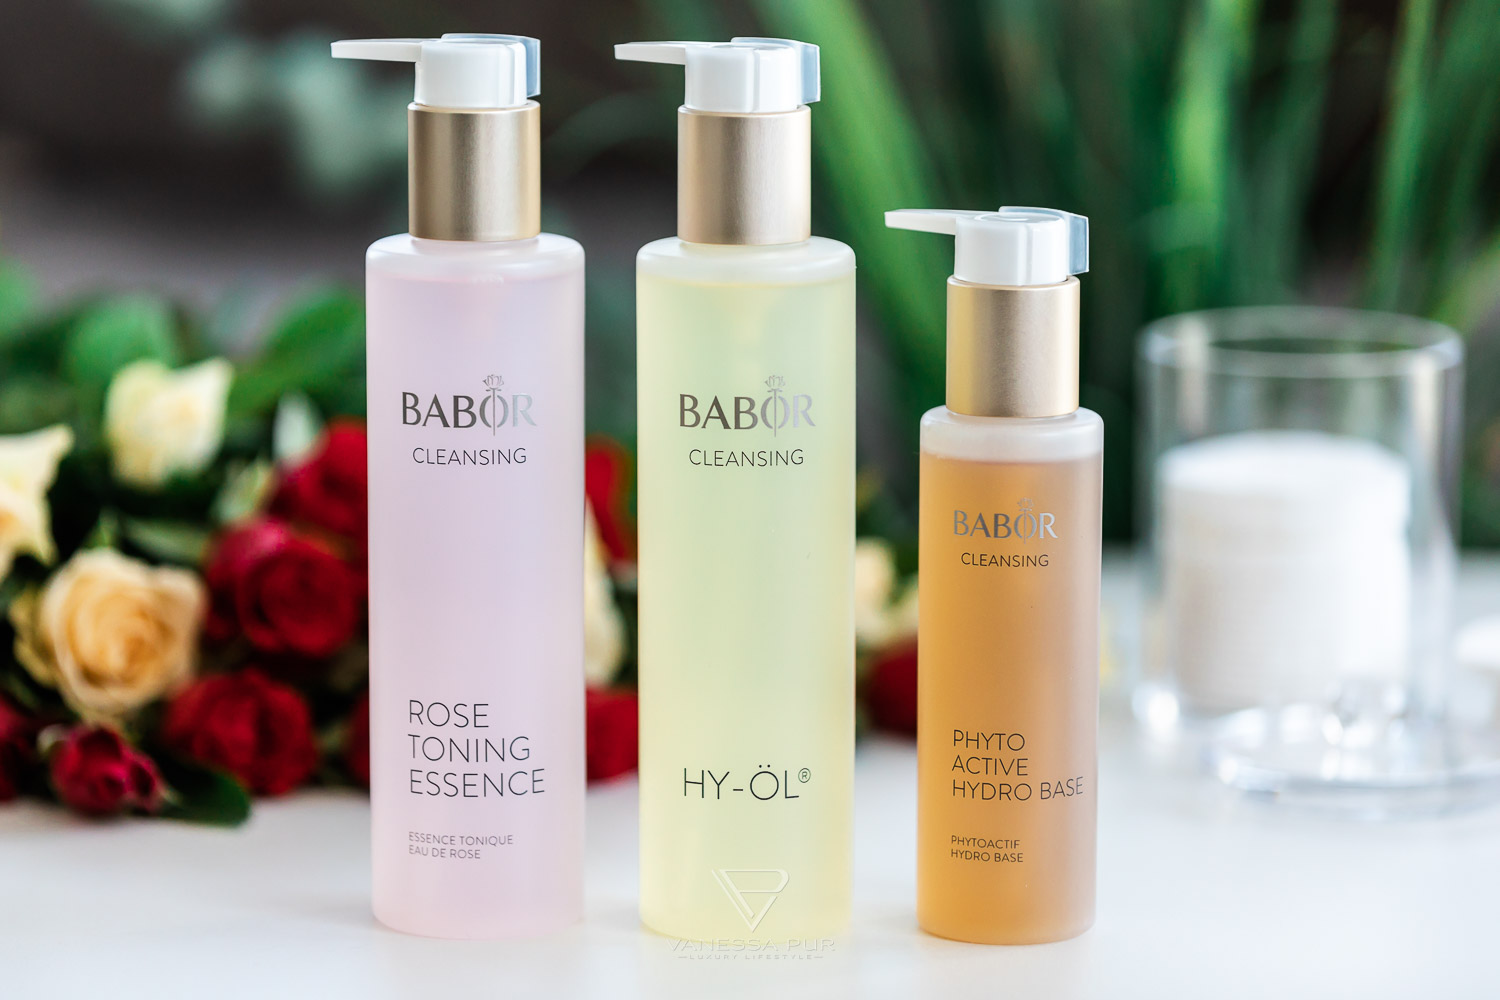 Babor - Doctor Babor Facial Care & Facial Cleansing - Cosmetics - Beautyblogger - Products - Experience - Facial Treatment